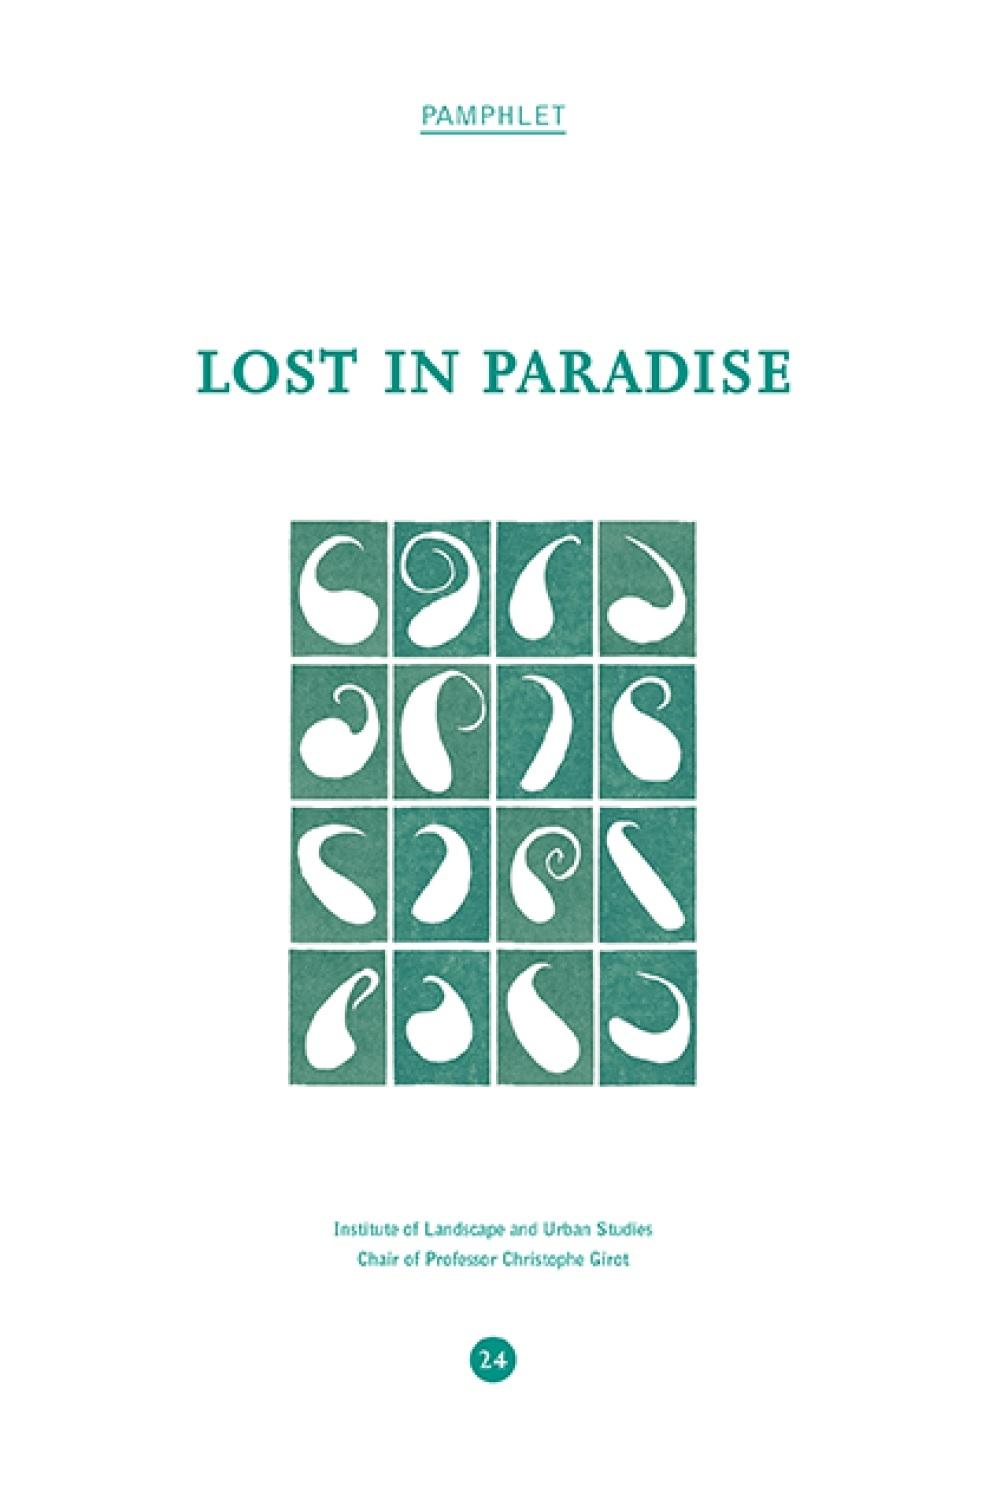 PAMPHLET 24: LOST IN PARADISE, A JOURNEY THROUGH THE PERSIAN LANDSCAPE